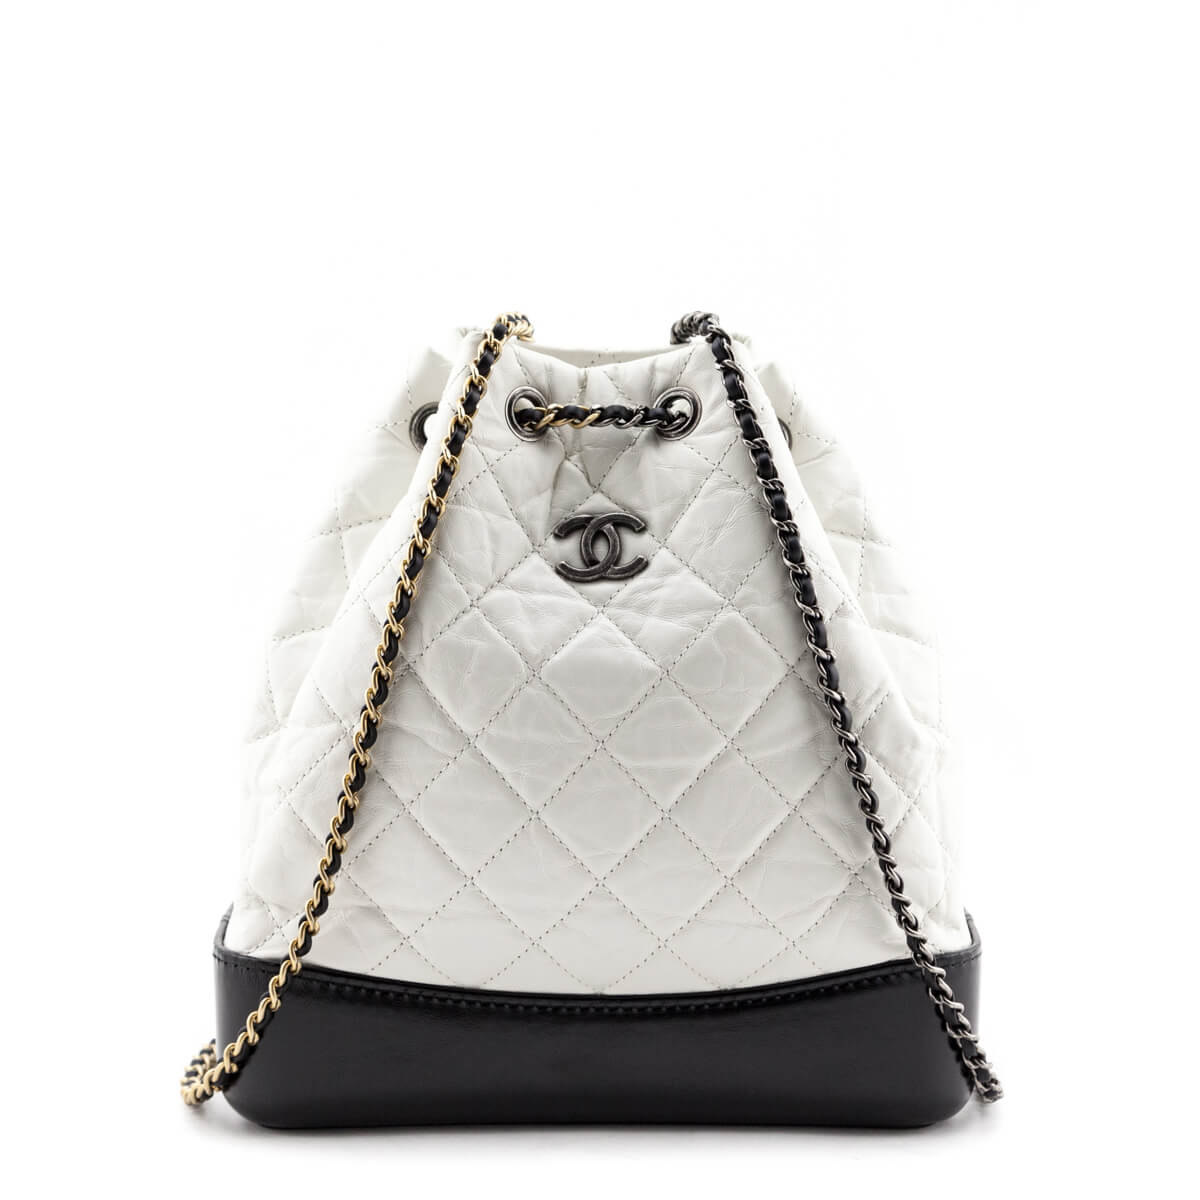 Chanel White Quilted Aged Calfskin Small Gabrielle Backpack - Love that Bag etc - Preowned Authentic Designer Handbags & Preloved Fashions